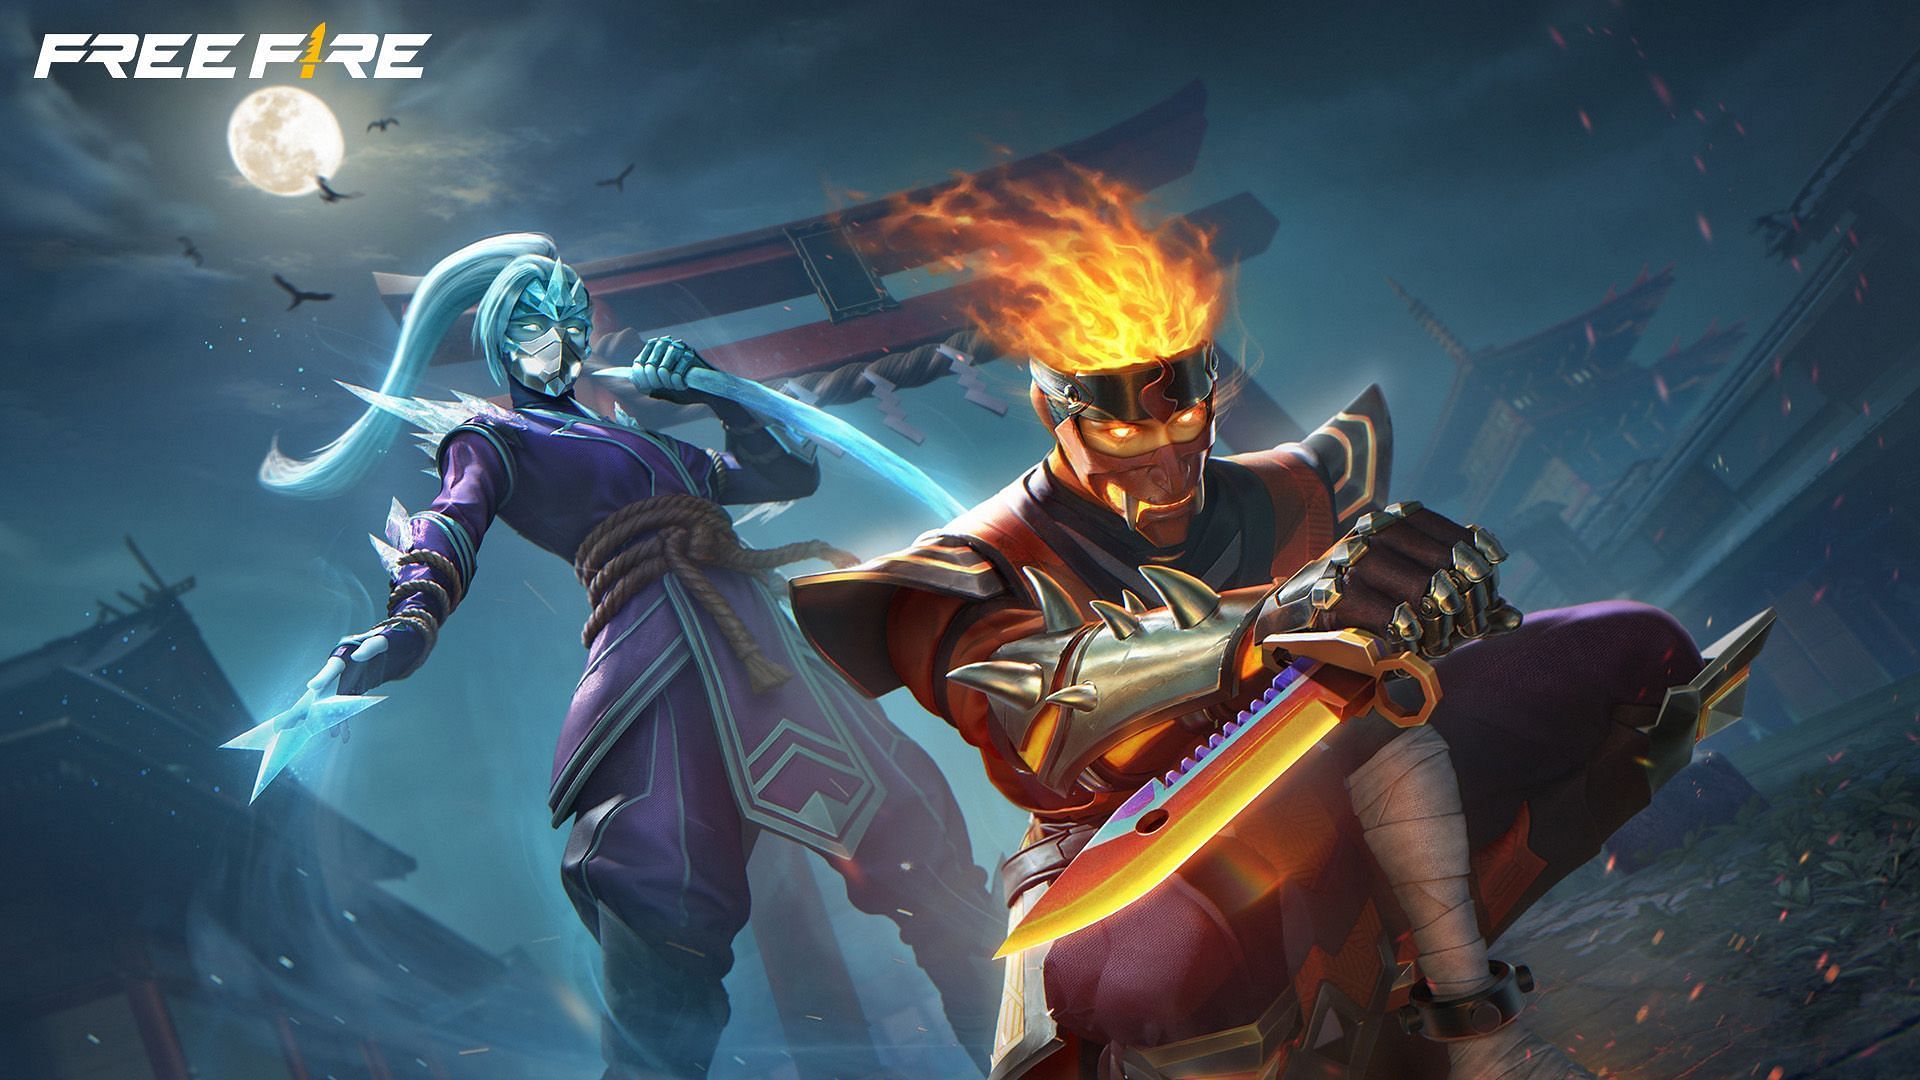 You can download the Free Fire Advance Server OB44 using the APK file (Image via Garena)